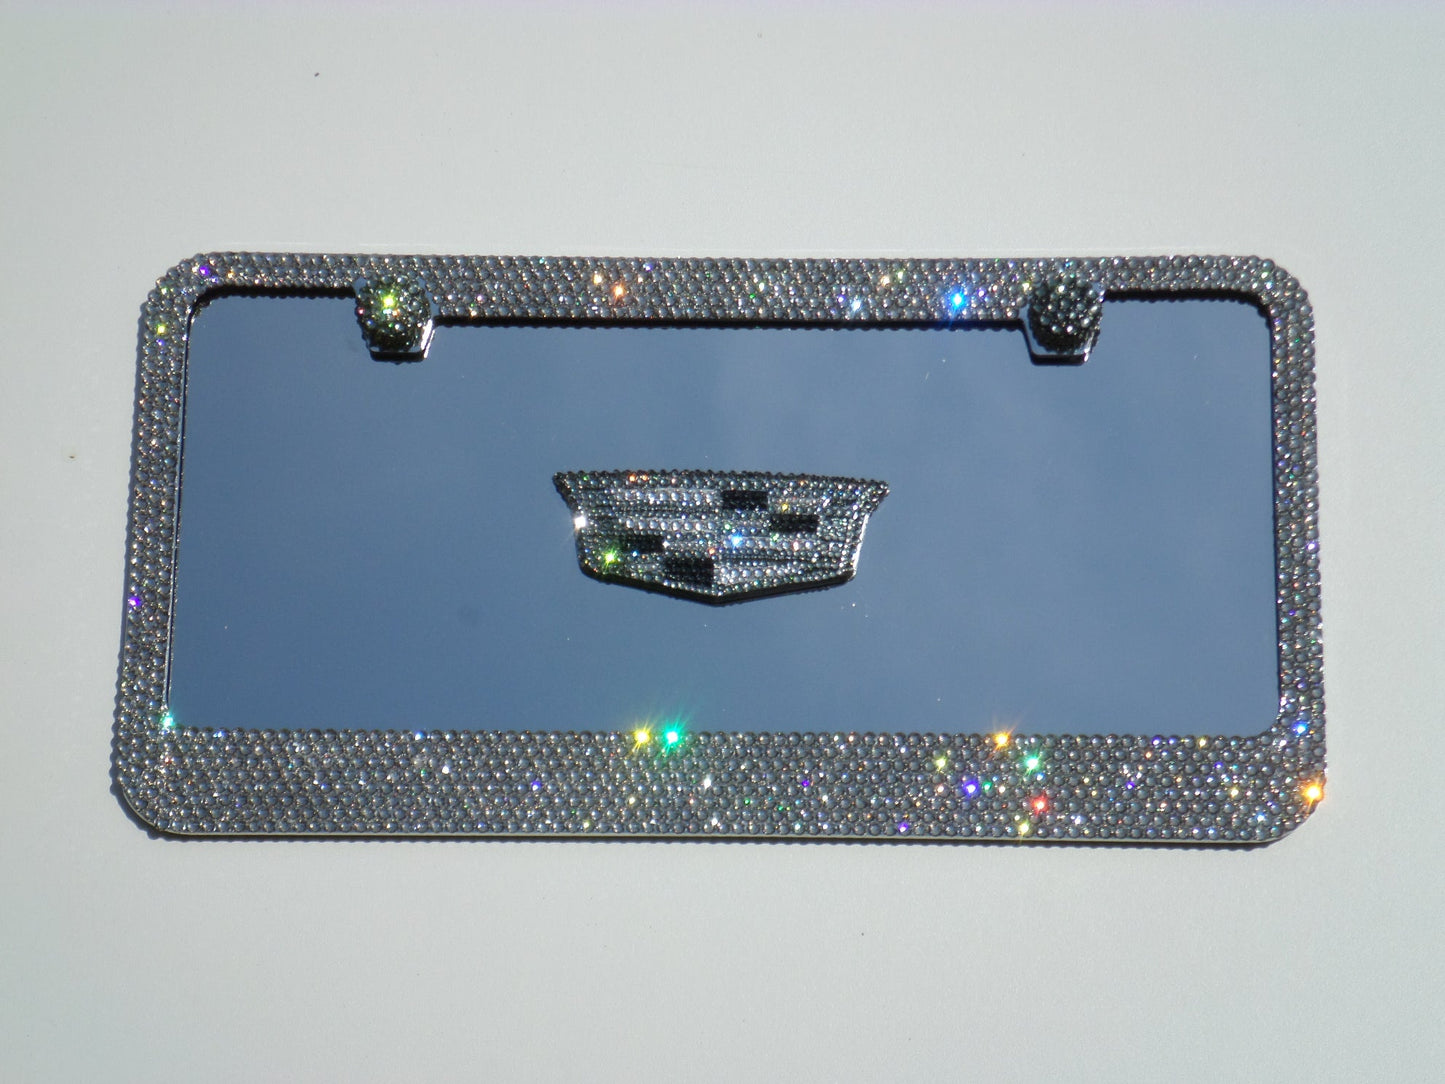 CUSTOM SYMBOL Crystallized License Plate - ICY Couture